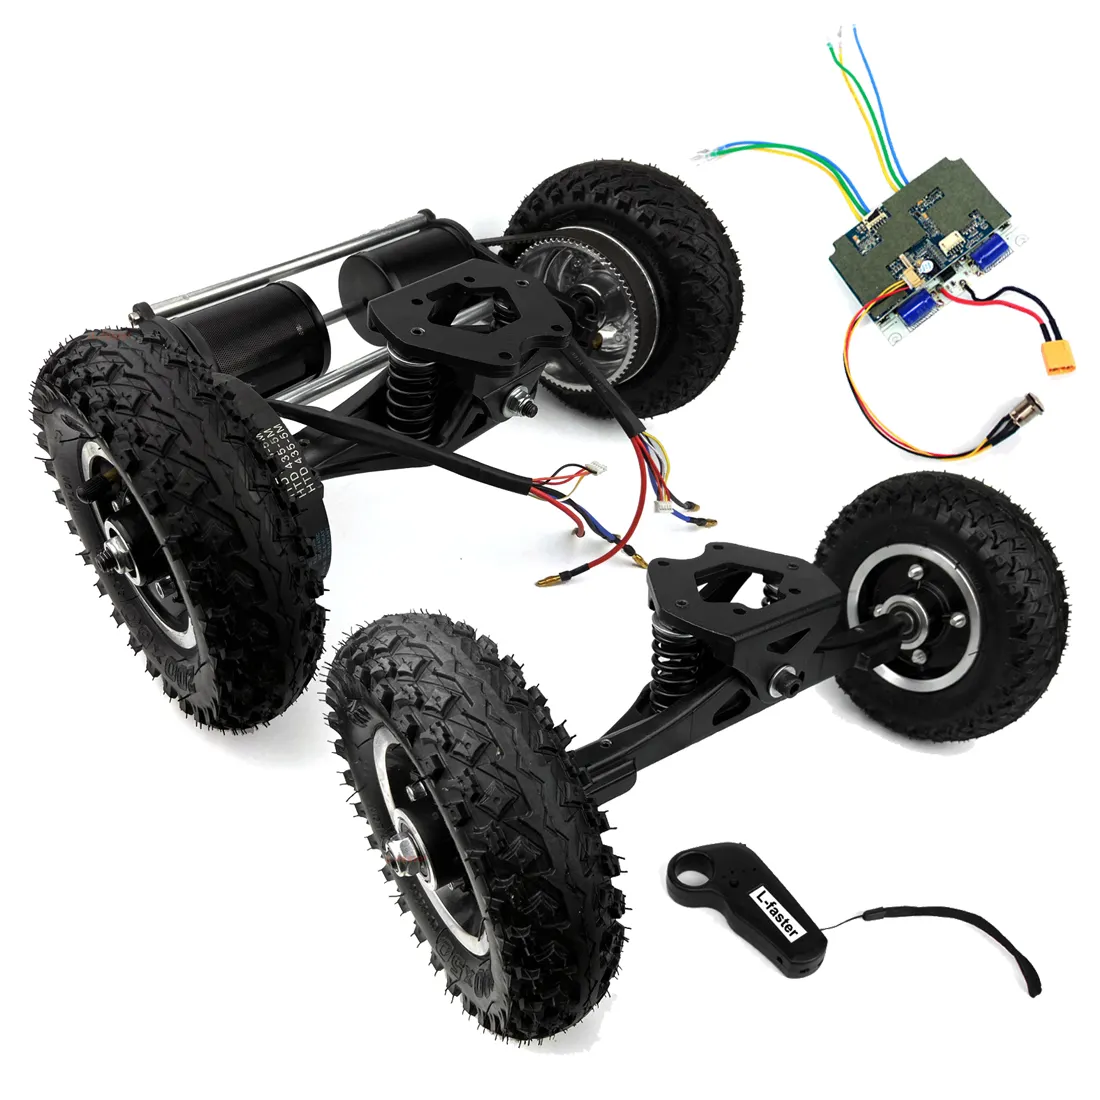 L-faster Electric Mountain Skateboard Conversion Kit With Strong Motor Bracket Off Road Board Truck With 190KV N63 Motor